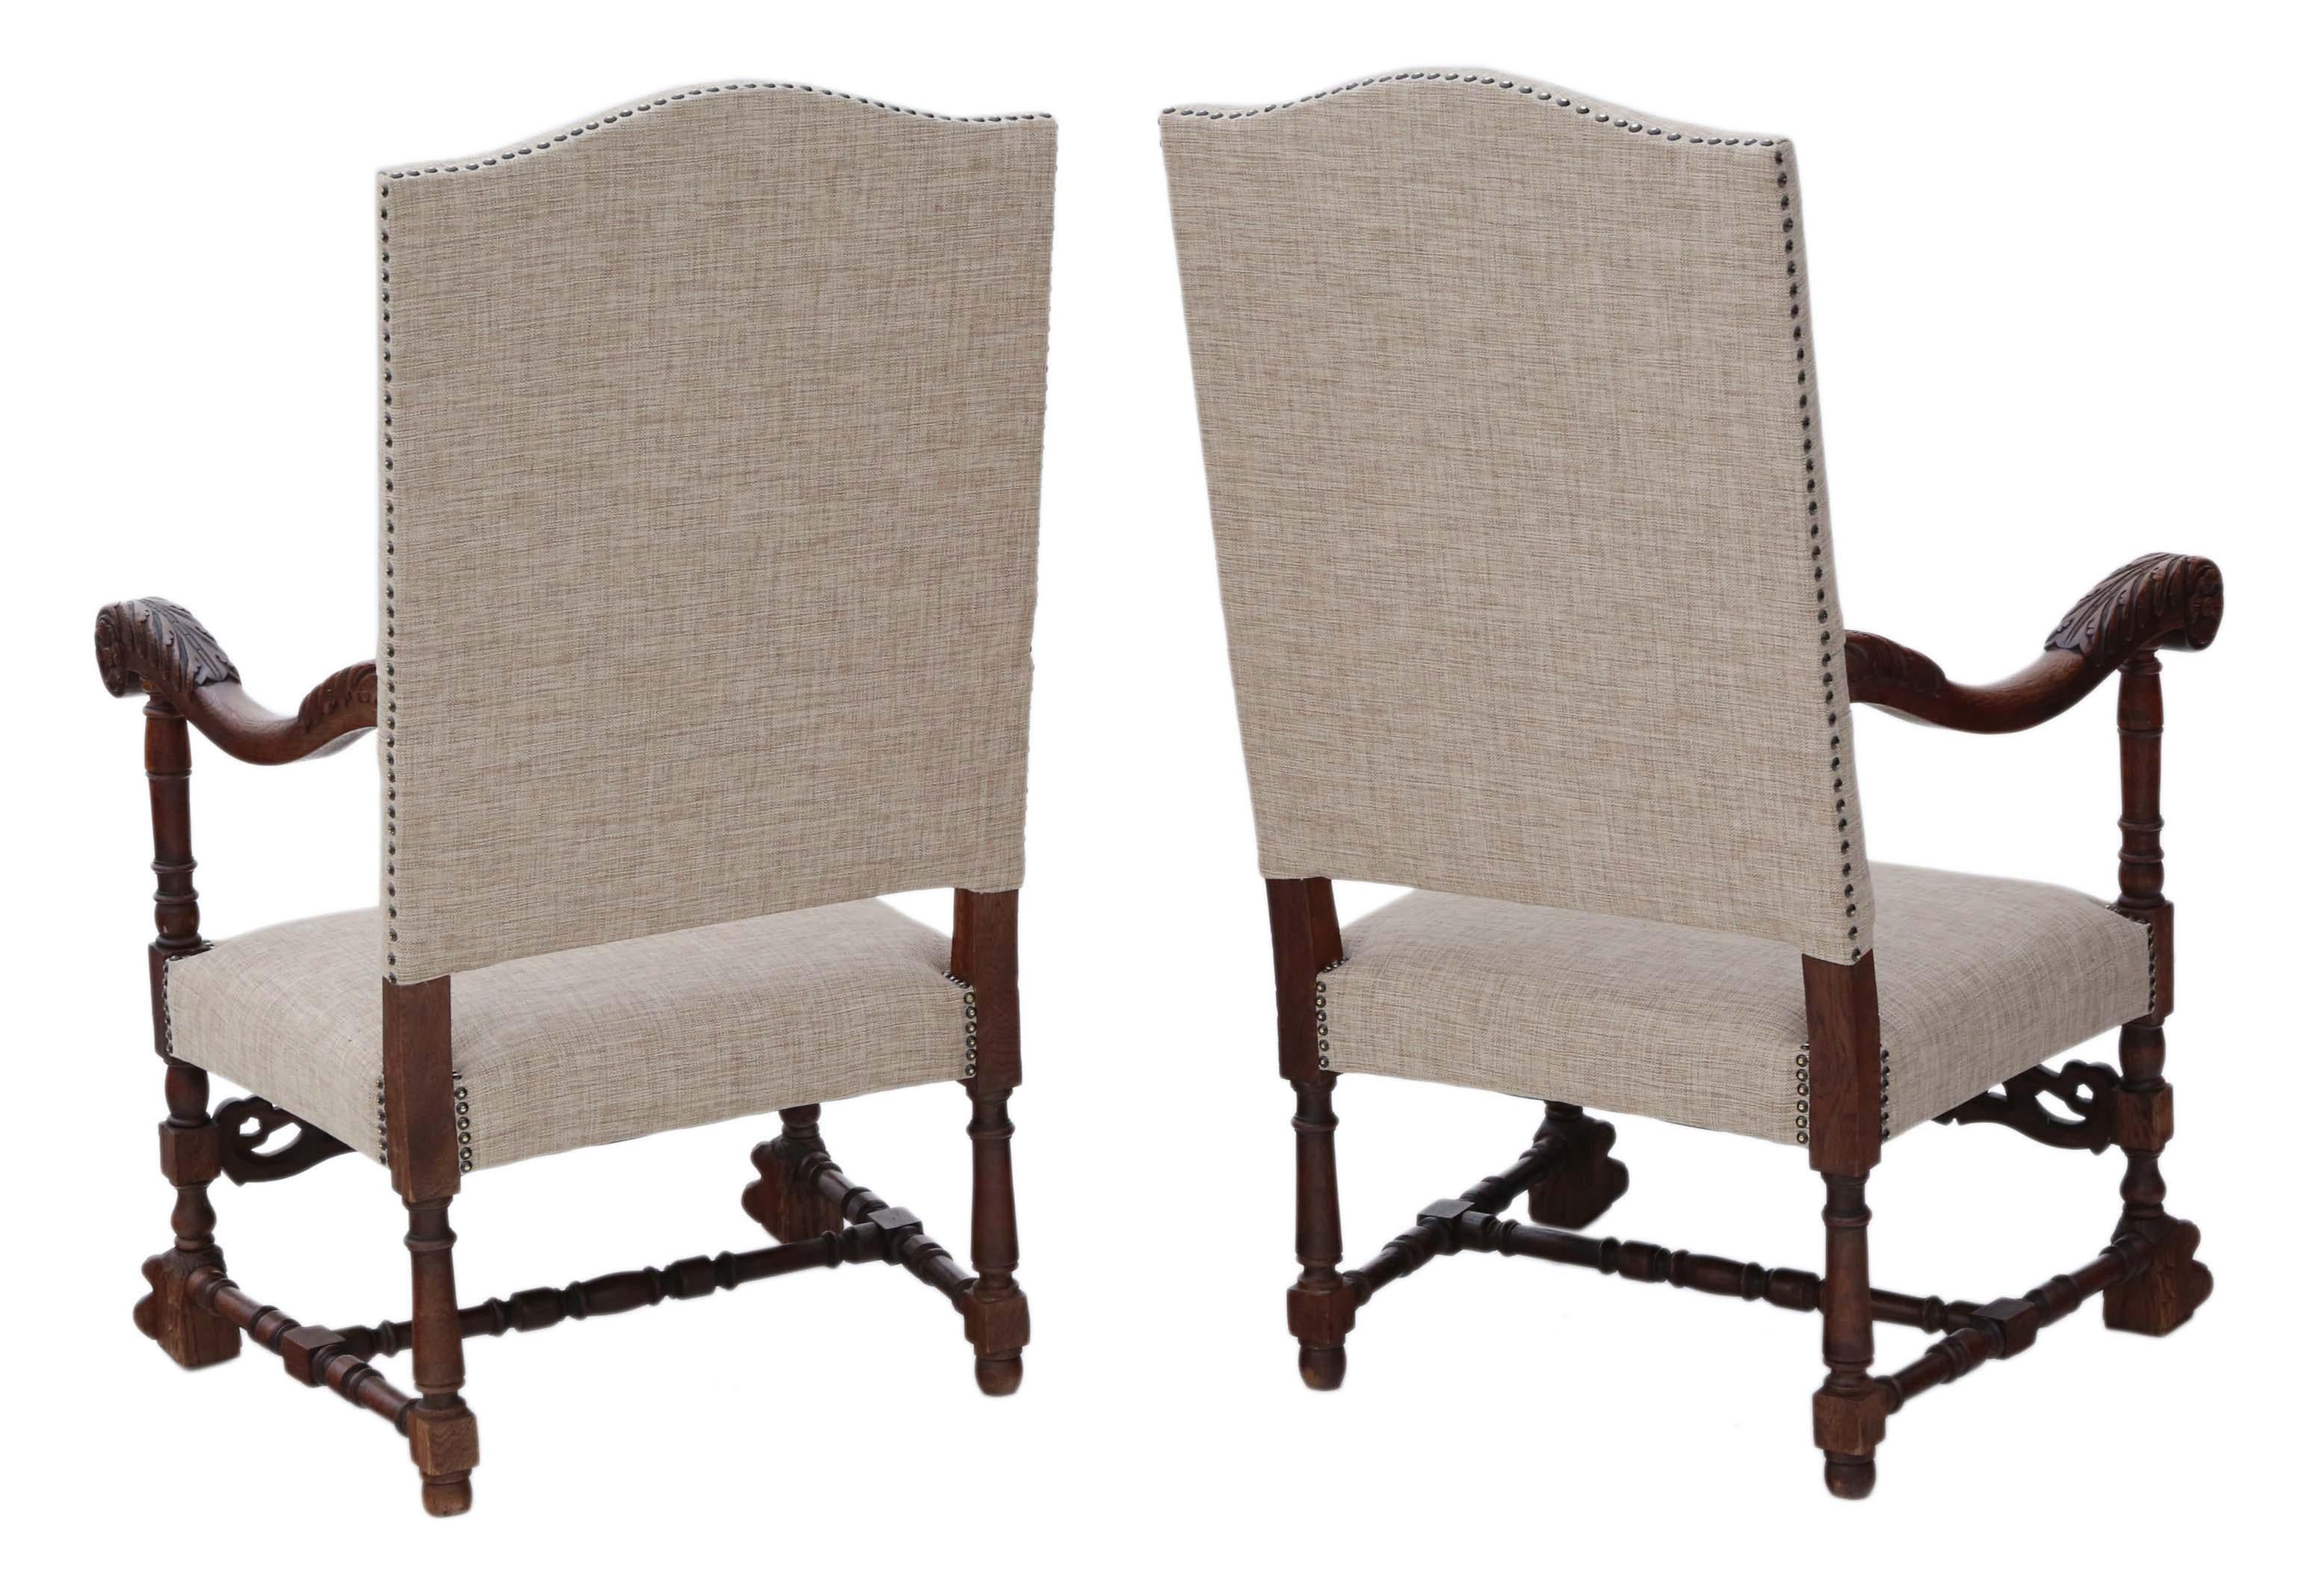 Pair of Charles II revival oak armchairs, circa 1900.
Solid, no loose joints and no woodworm. Full of age, character and charm. Very decorative chairs. New upholstery in a heavy weight fabric.
Would look great in the right location! Rare quality